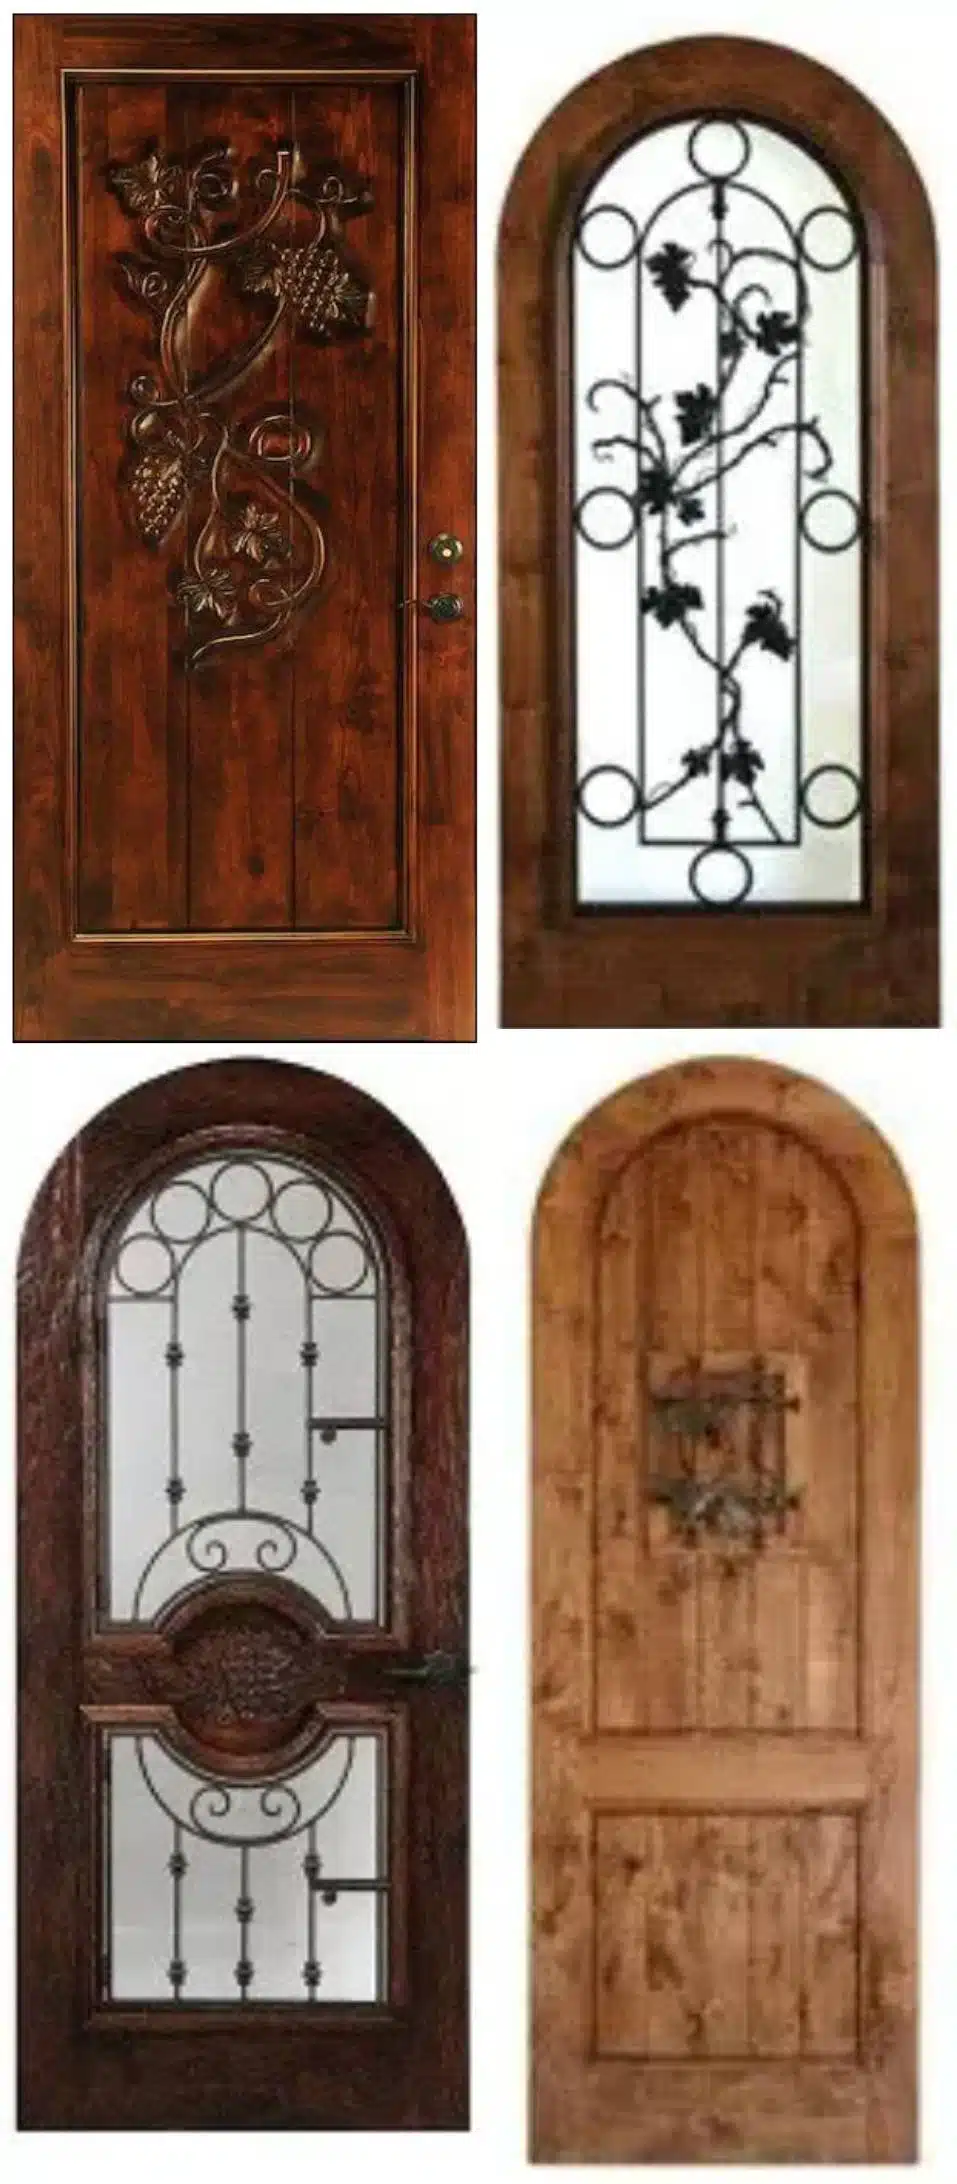 a photo of 4 types of wooden wine cellar doors, arched and rectangular, with carvings and iron detailing